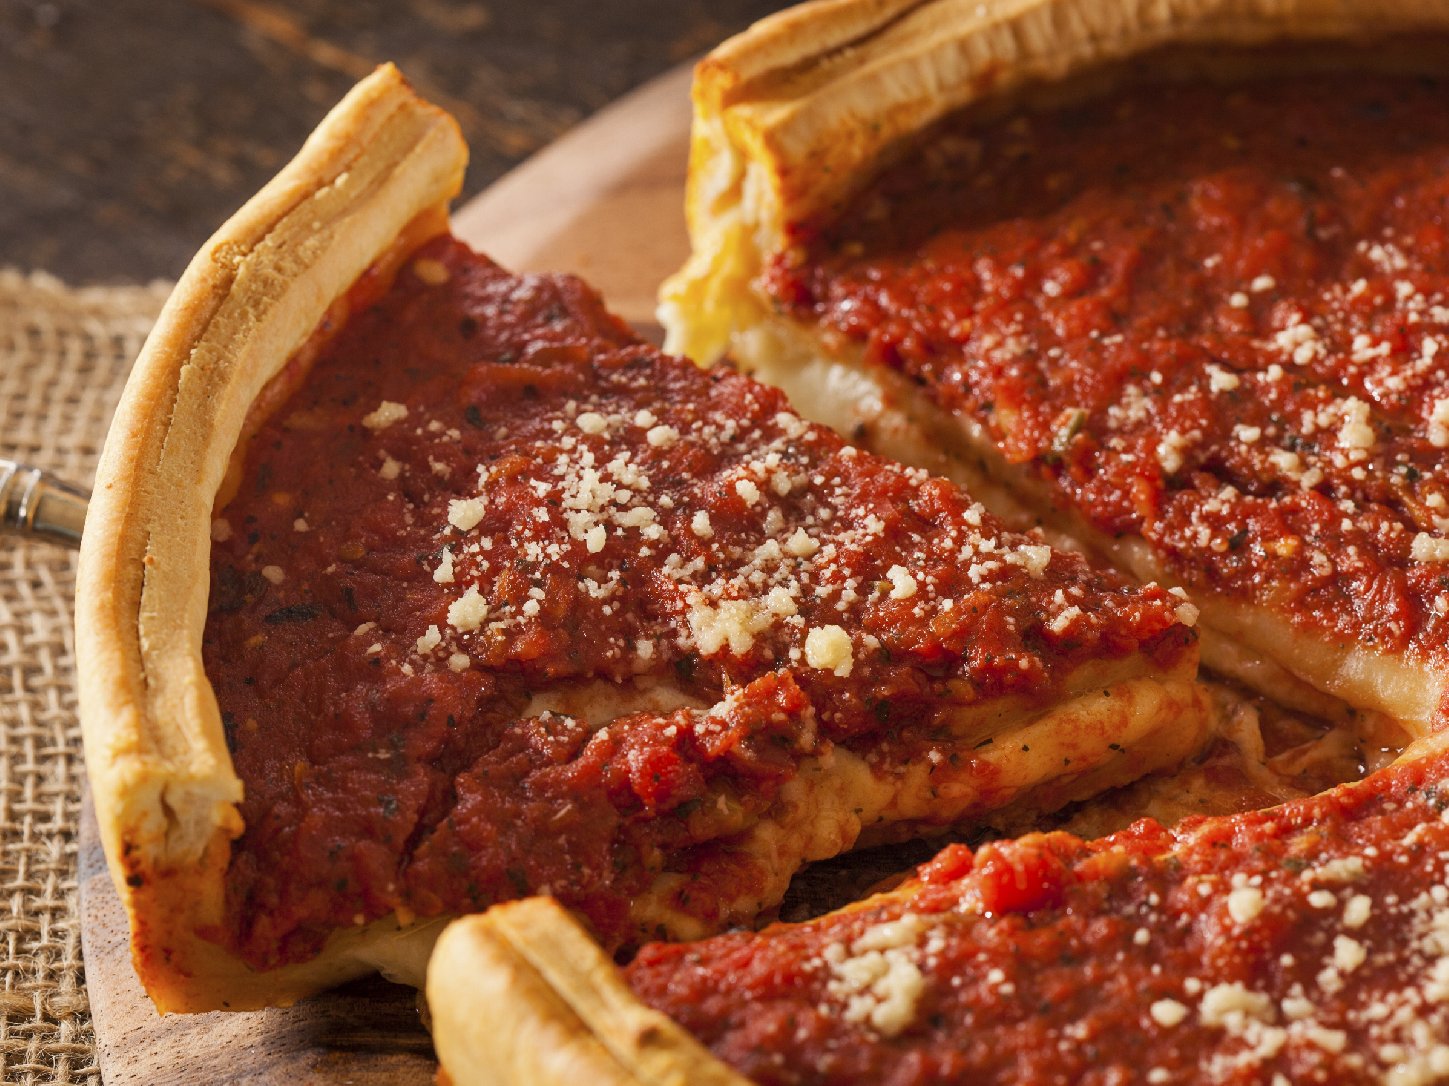 Comedy Central's Jon Stewart has called Chicago-style pizza "tomato soup in a bread bowl." Photo: iStockphoto